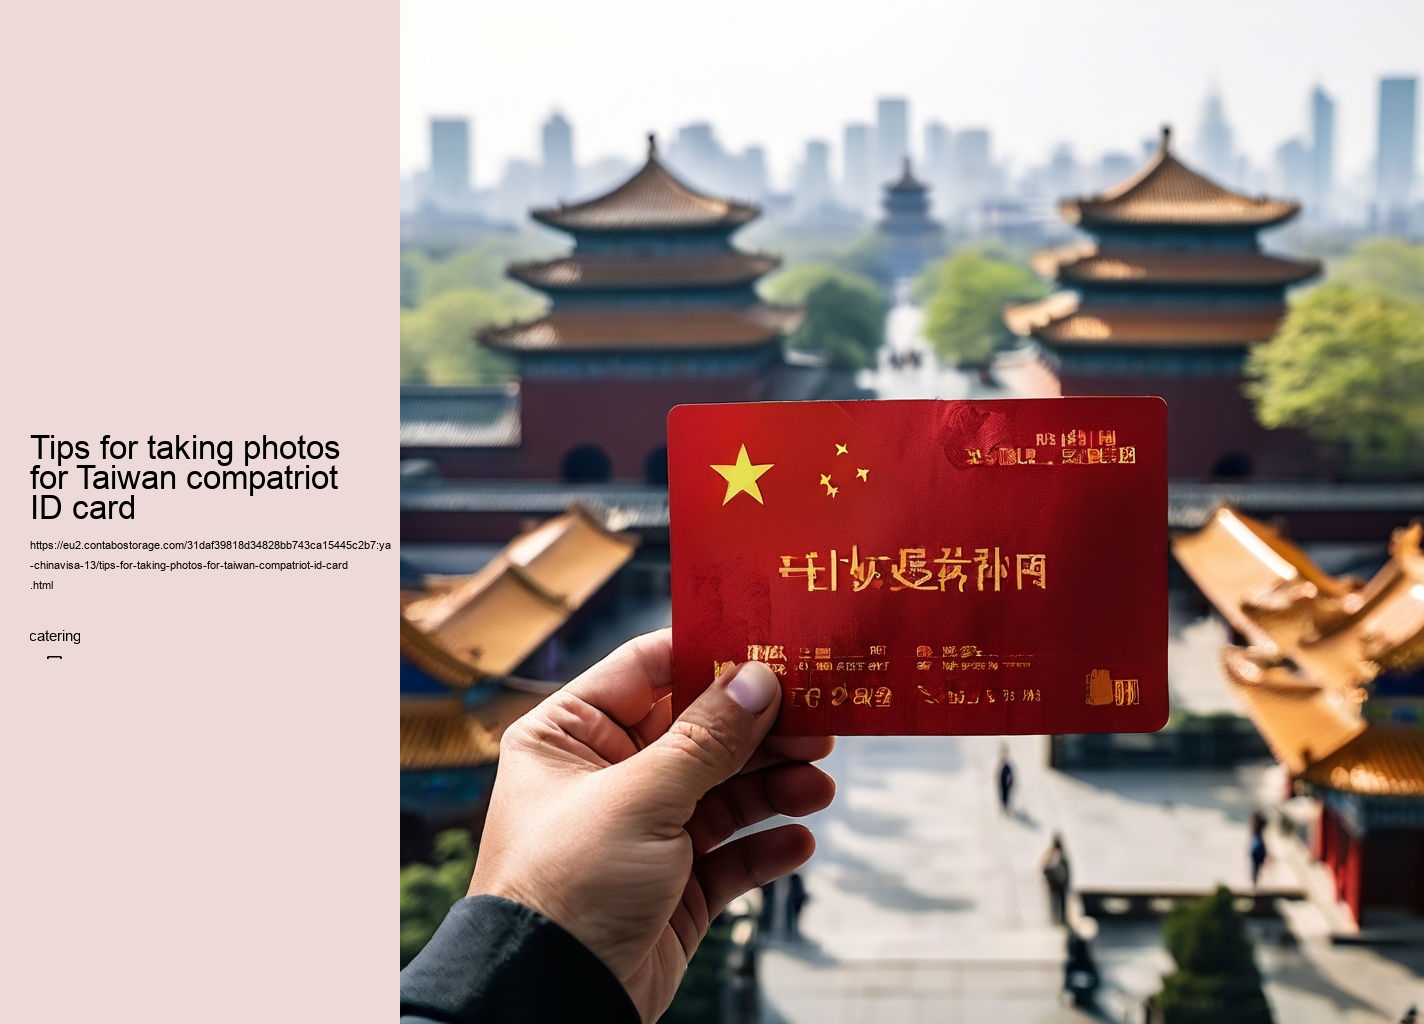 Tips for taking photos for Taiwan compatriot ID card